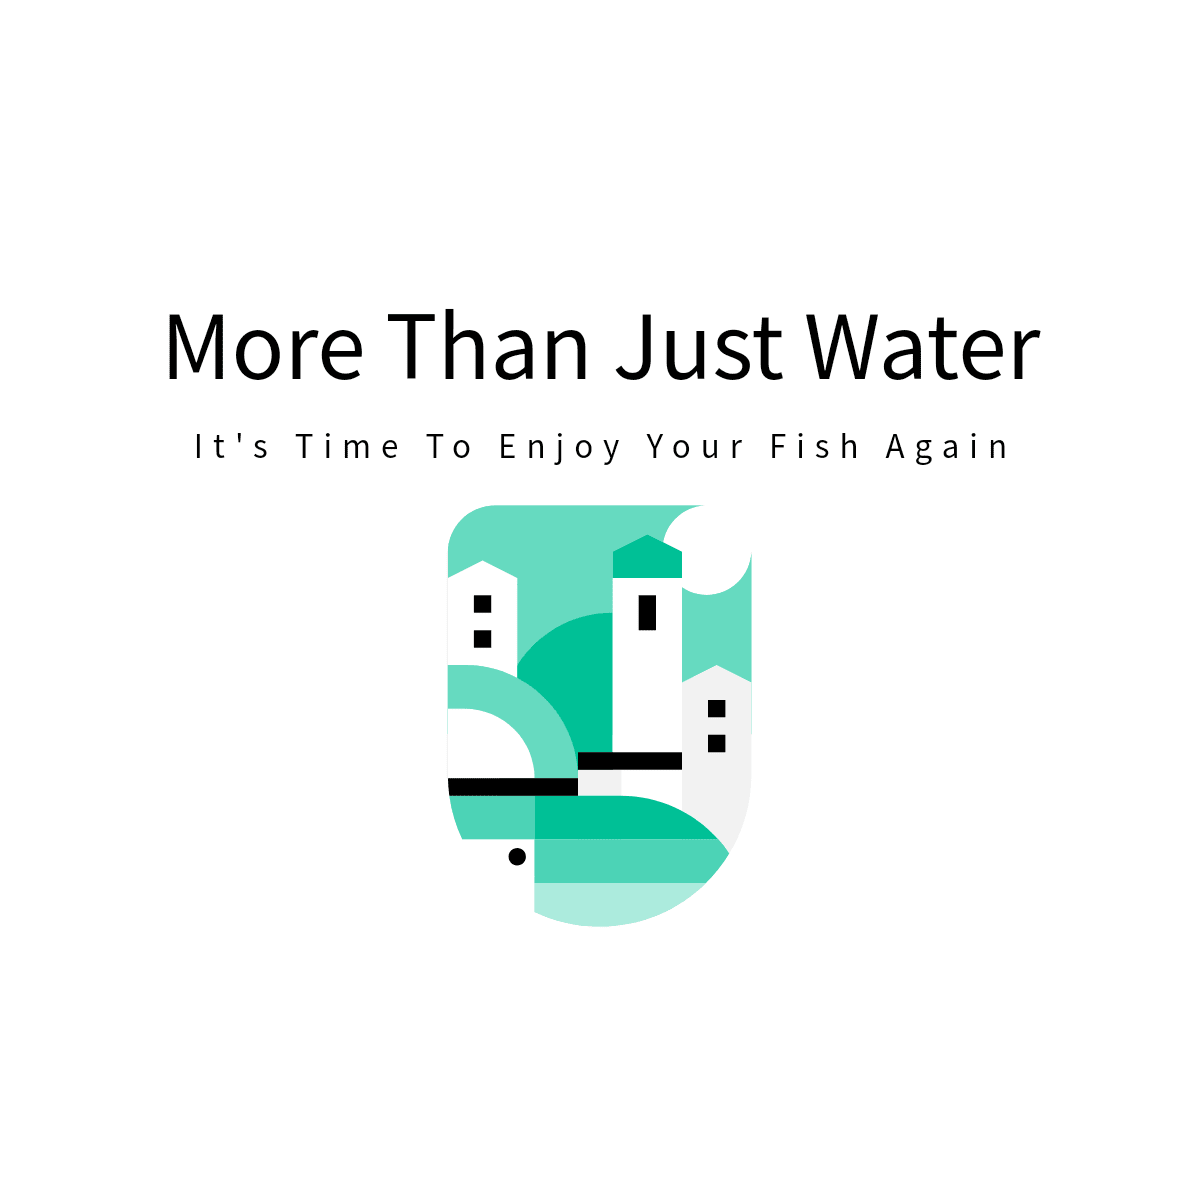 More Than Just Water